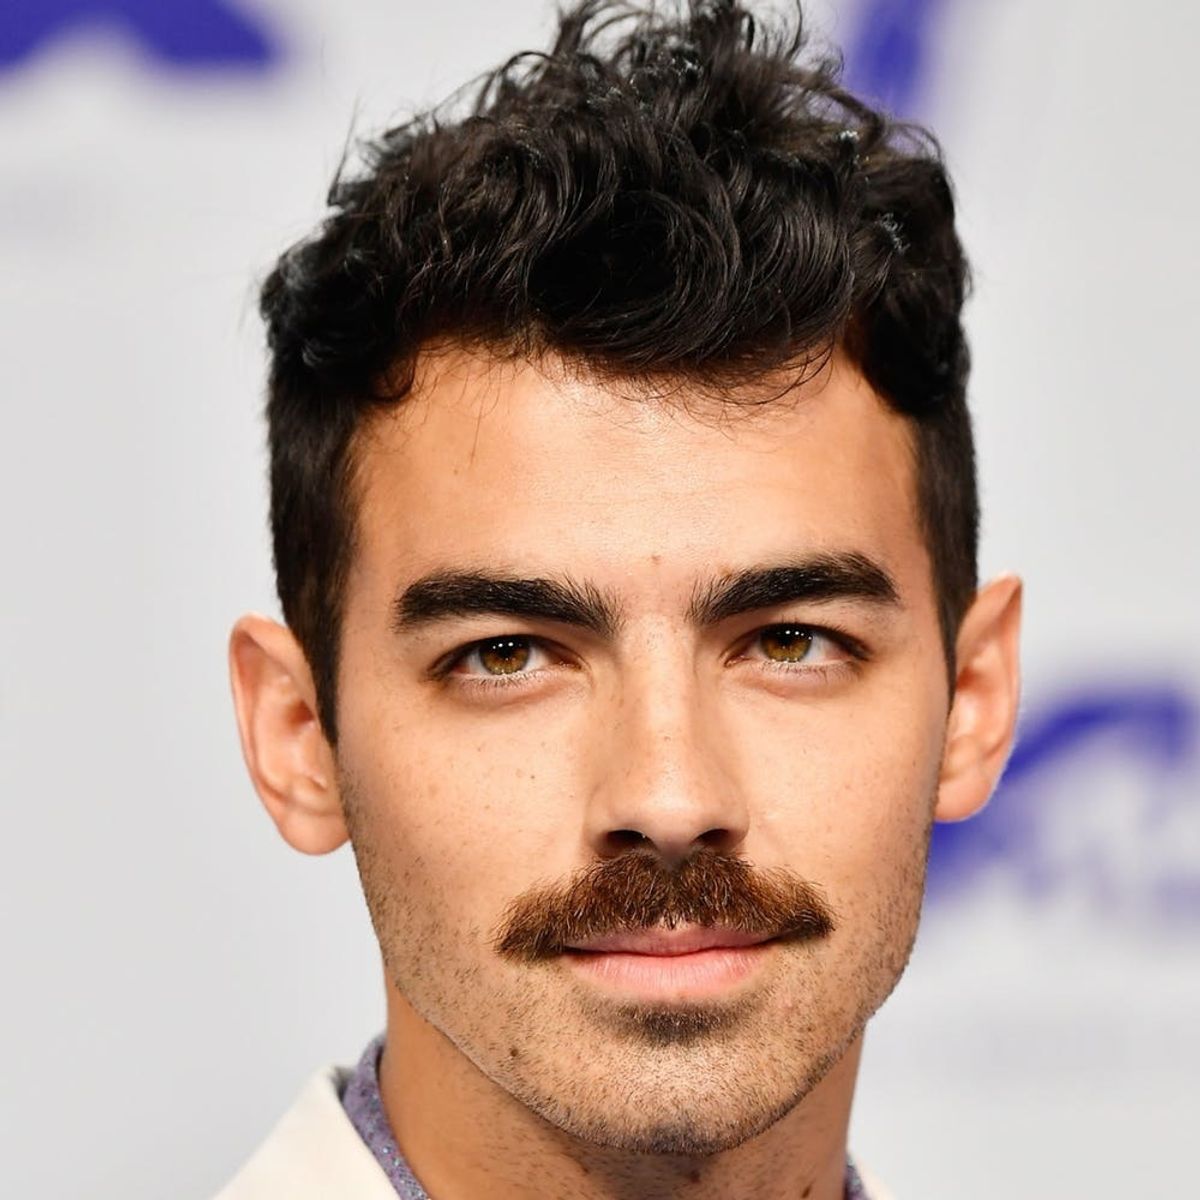 Joe Jonas Just Debuted a Massive Mustache at the 2017 MTV VMAs and Twitter Is Freaking. Out.